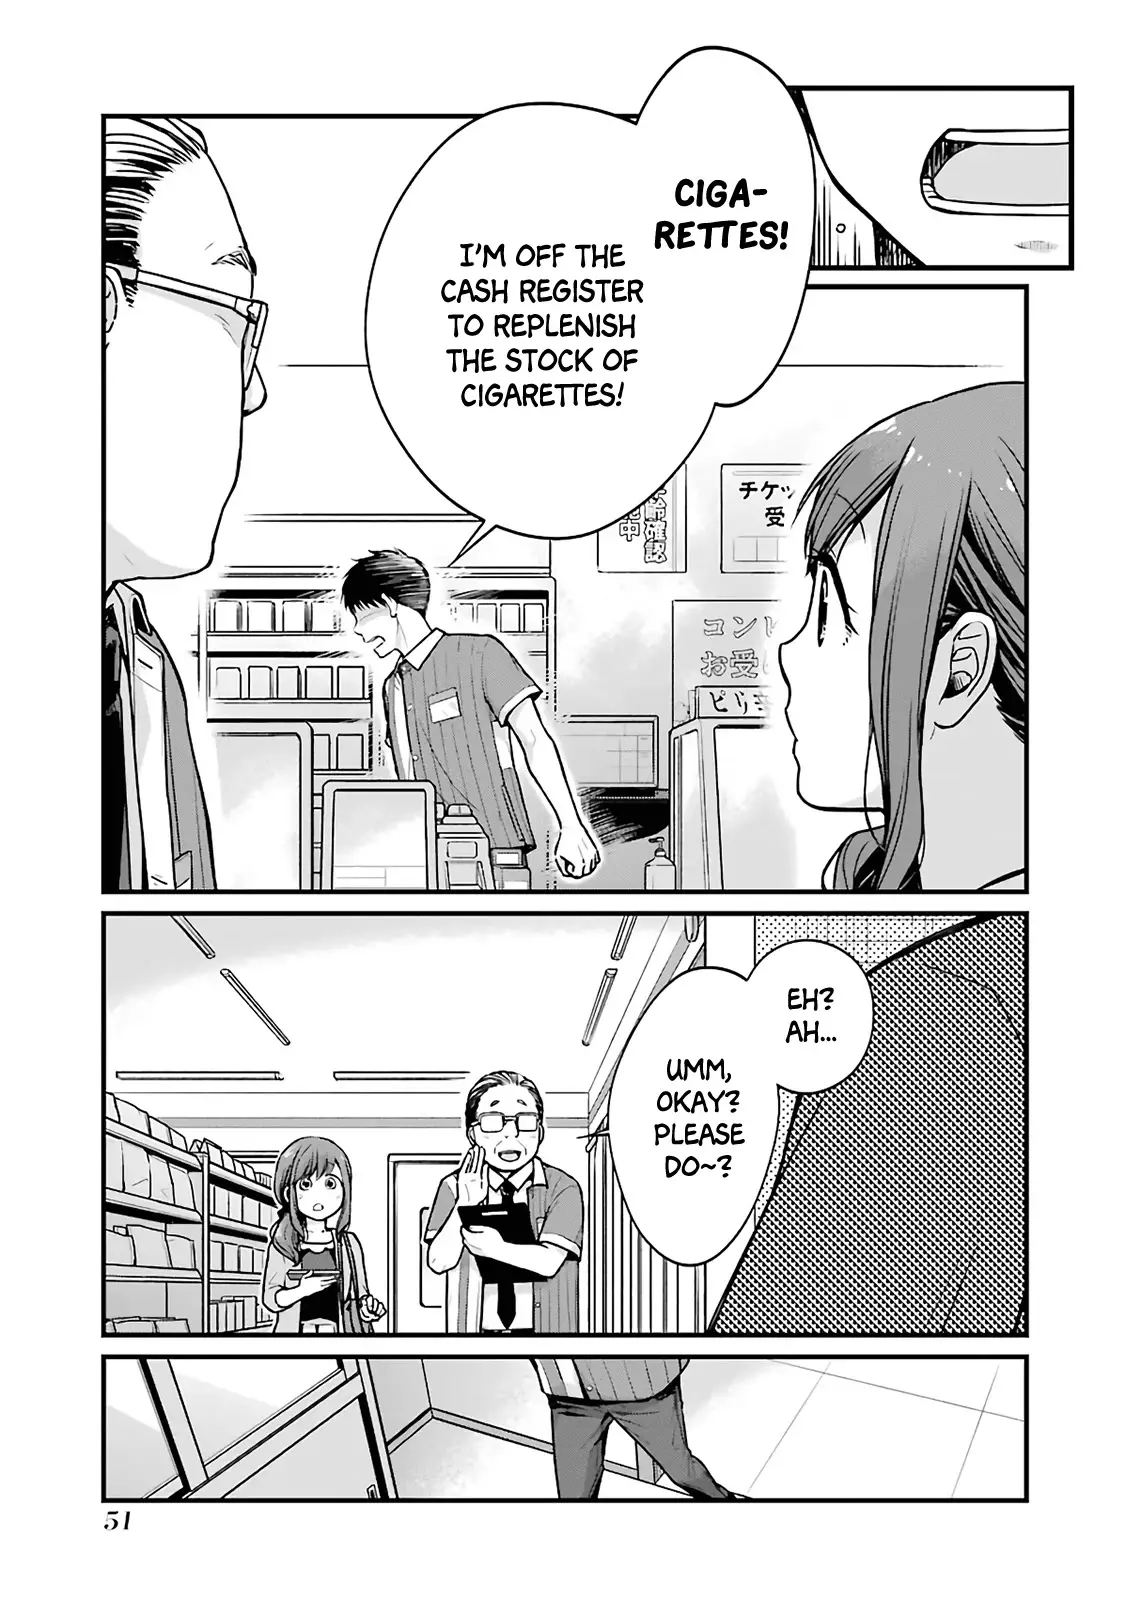 5 Minutes With You At A Convenience Store - 6 page 5